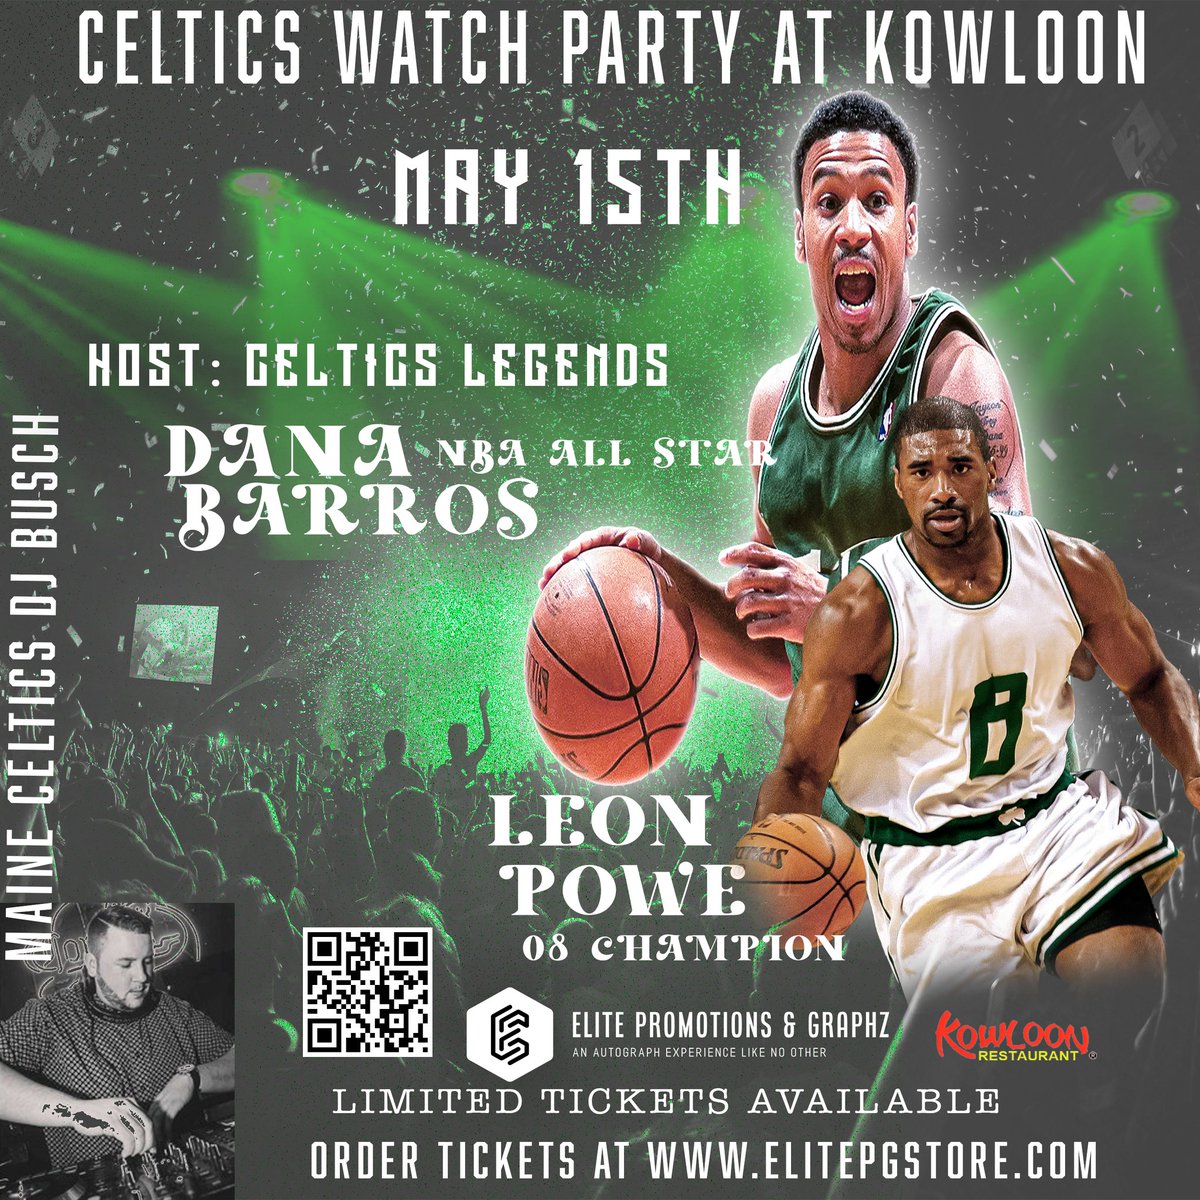 THE @KowloonSaugus #watchparty #celticswatchparty HOSTS LEGENDS #DANABARROS #LEONPOWEWatch the #BostonCeltics game & enjoy fun filled night with music, food, and drinks.  LTD TICKETS AVAILABLE / EVENT WILL SELL OUT ORDER TICKETS elitepgstore.com #BOSTONEVENT #Boston